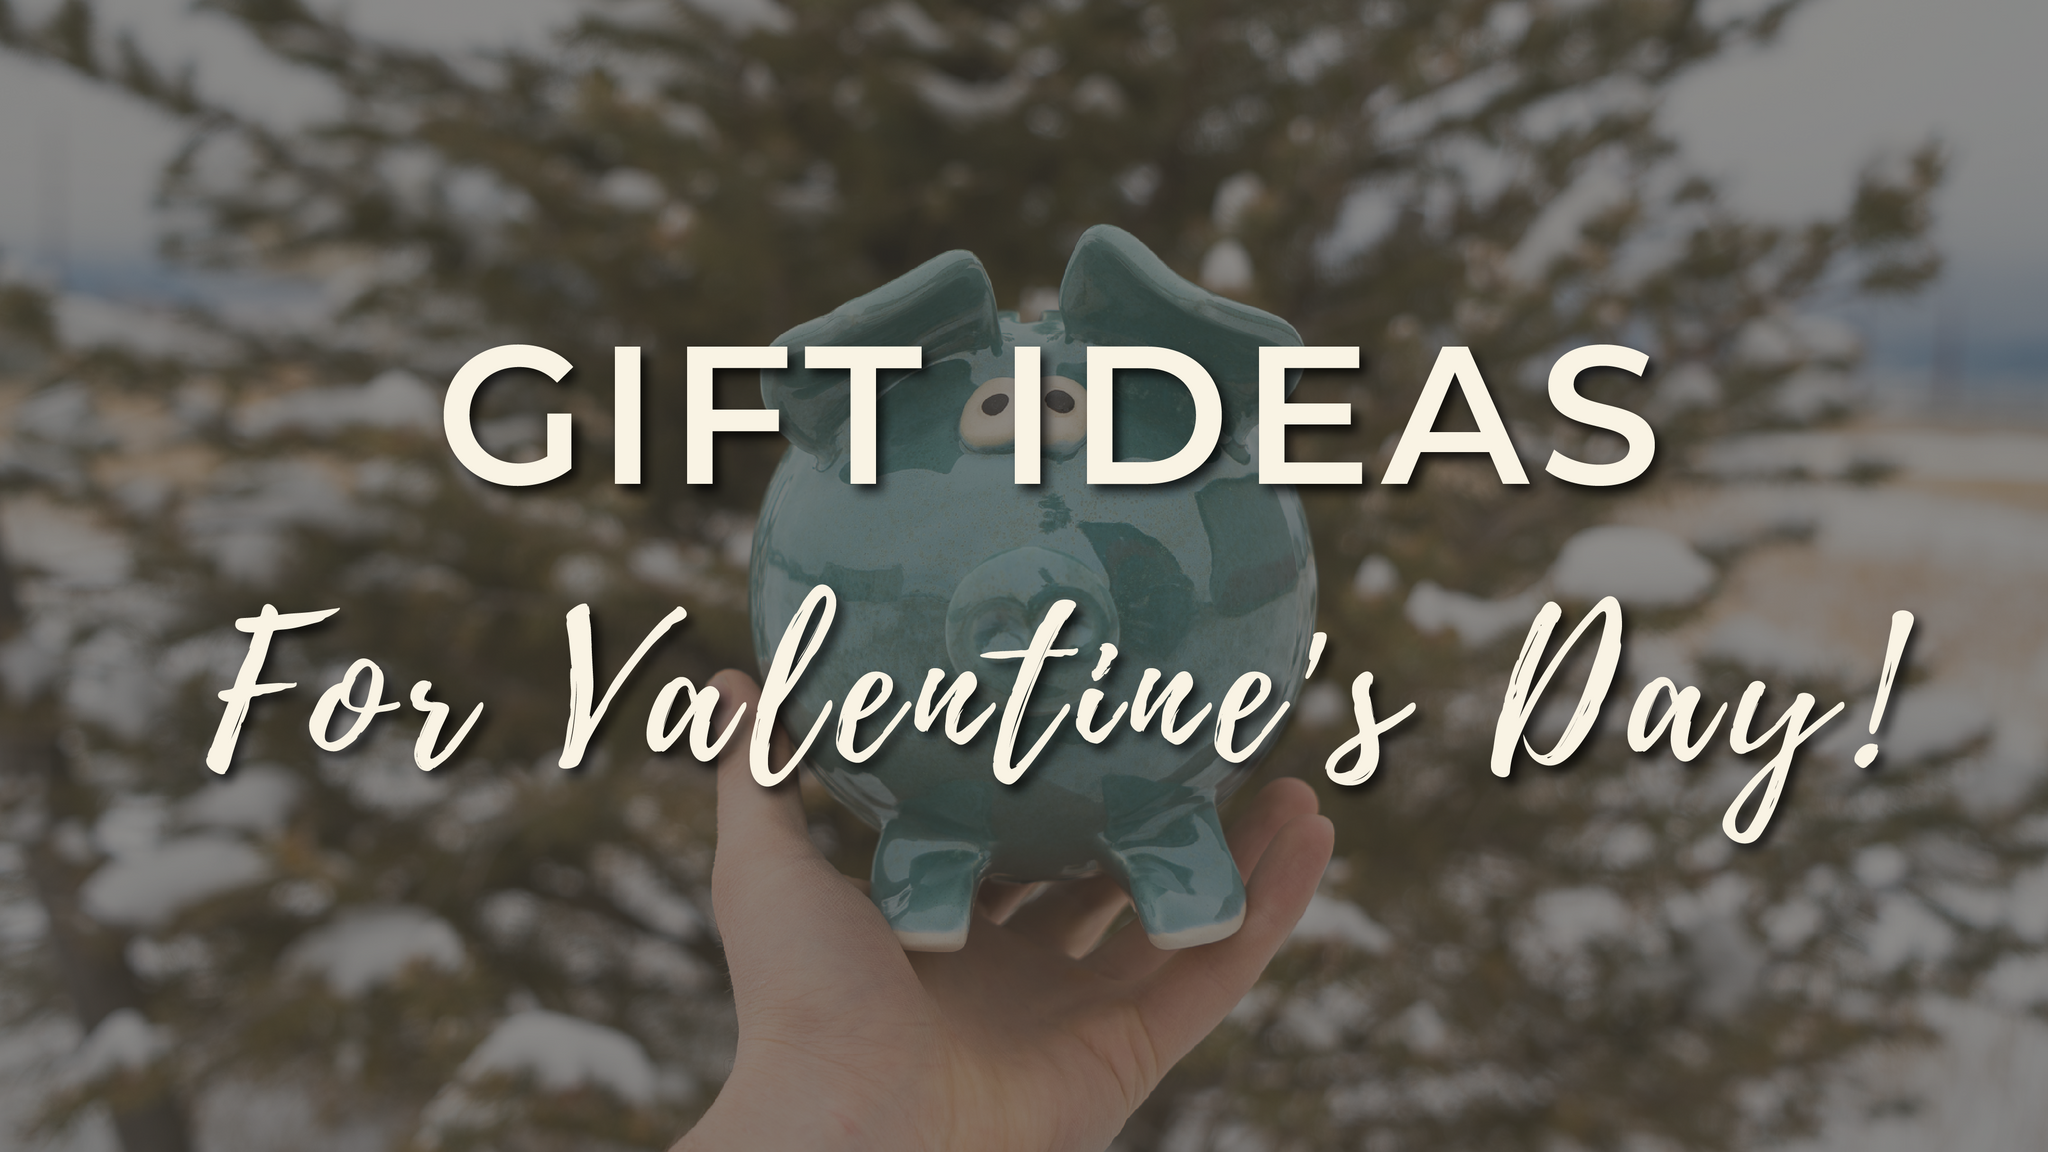 Montana Gift Ideas for Valentine's Day 2021